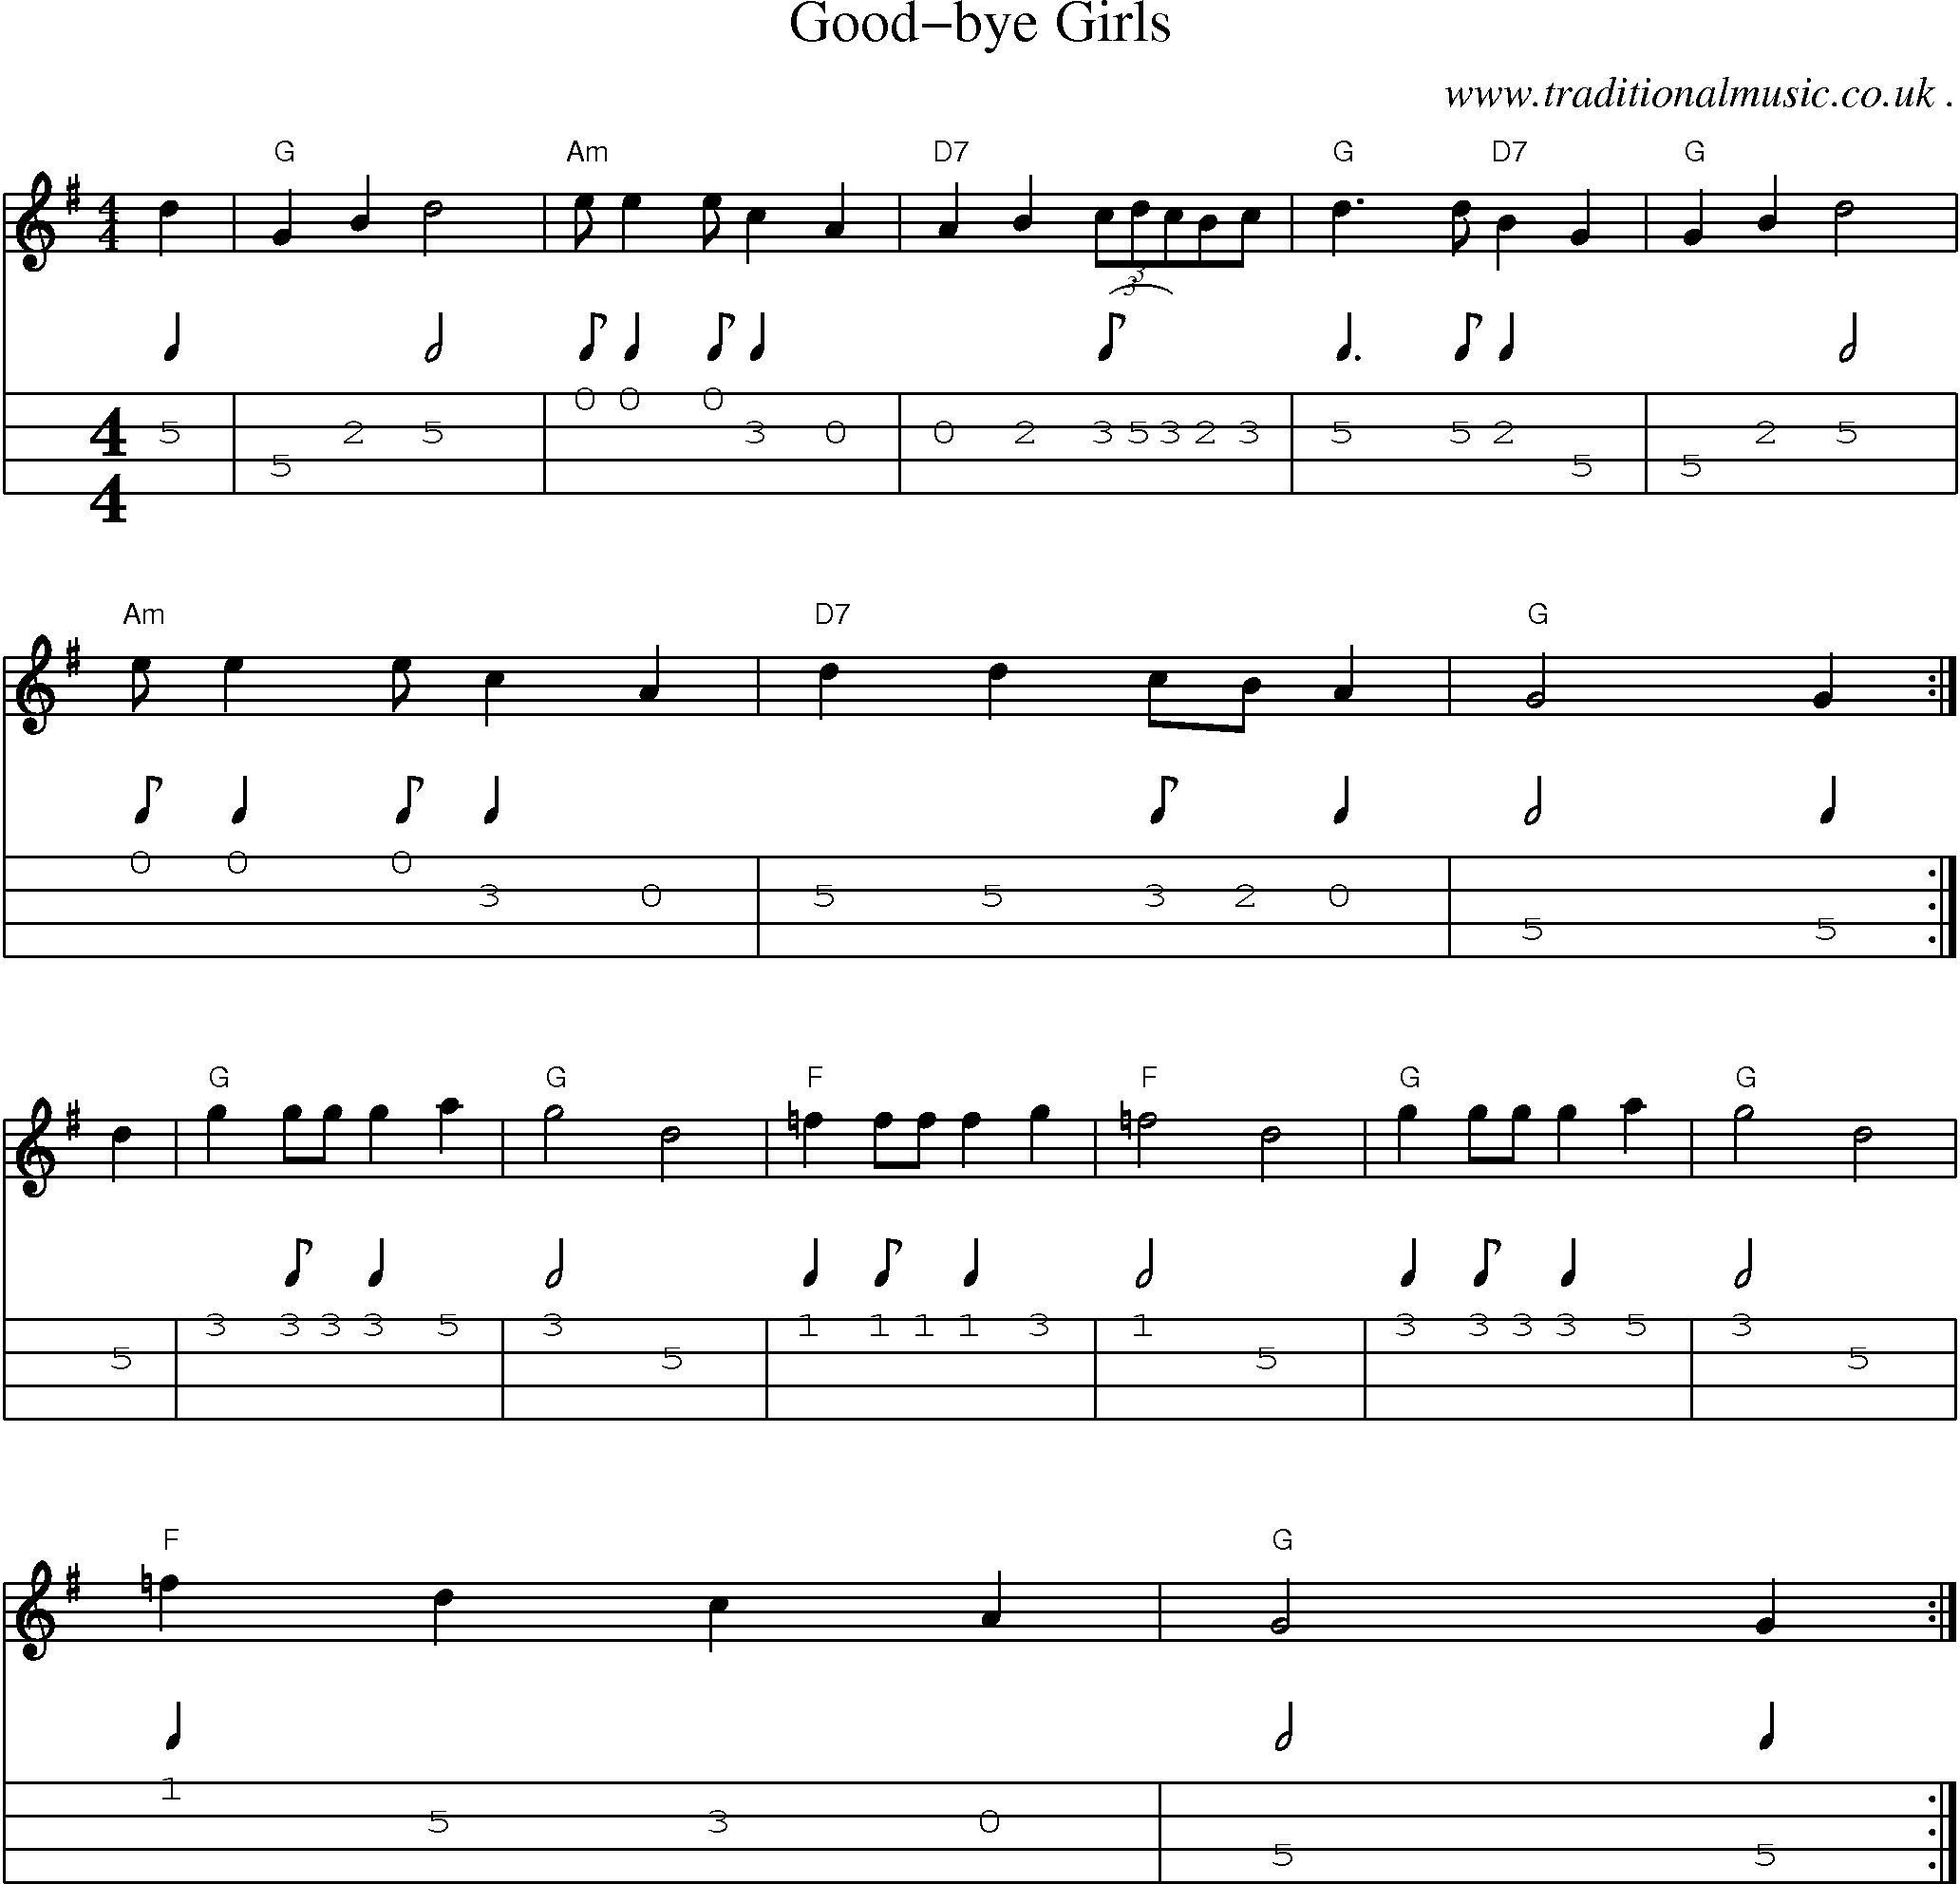 Sheet-Music and Mandolin Tabs for Good-bye Girls